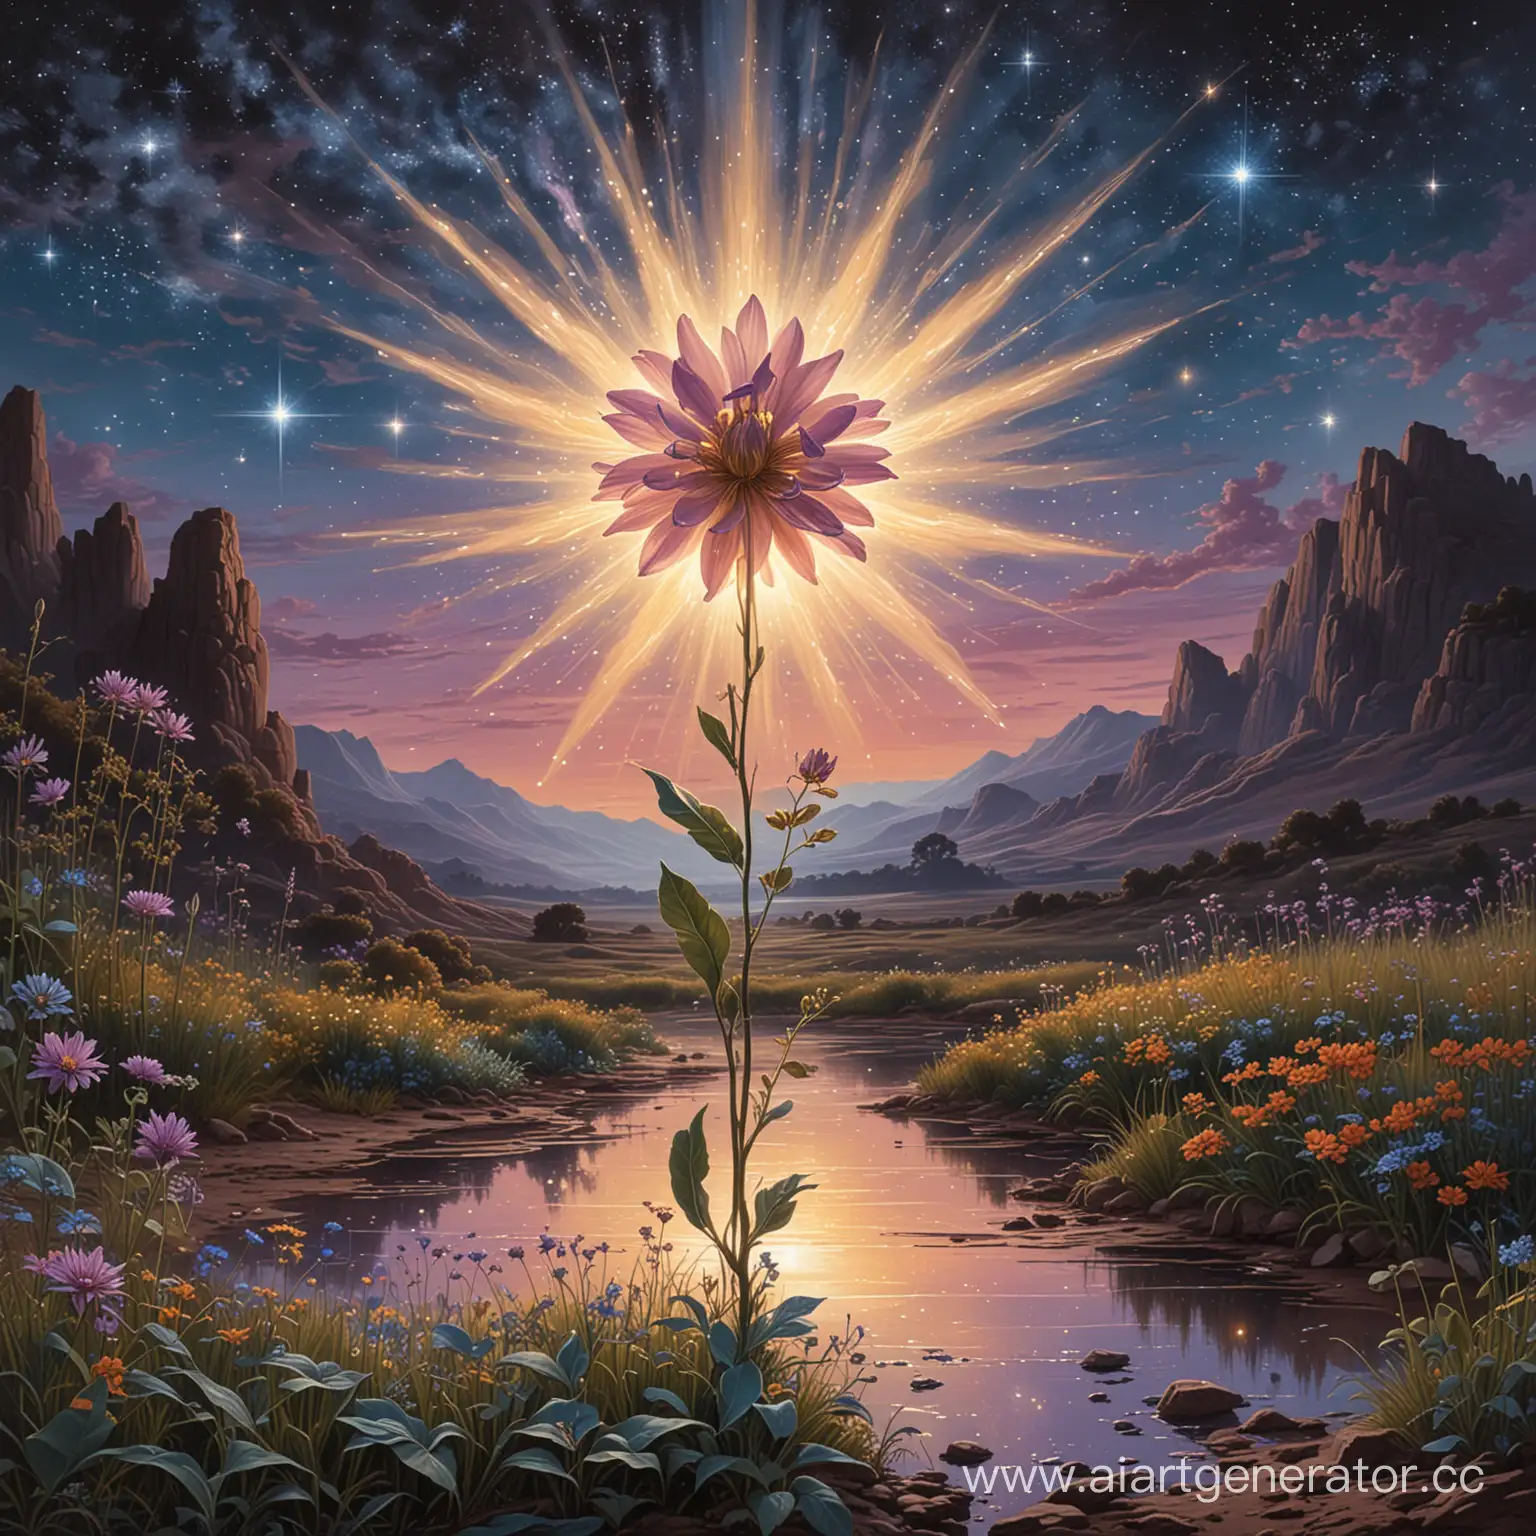 Enchanted-Night-Sky-with-Glowing-Flower-Landscape